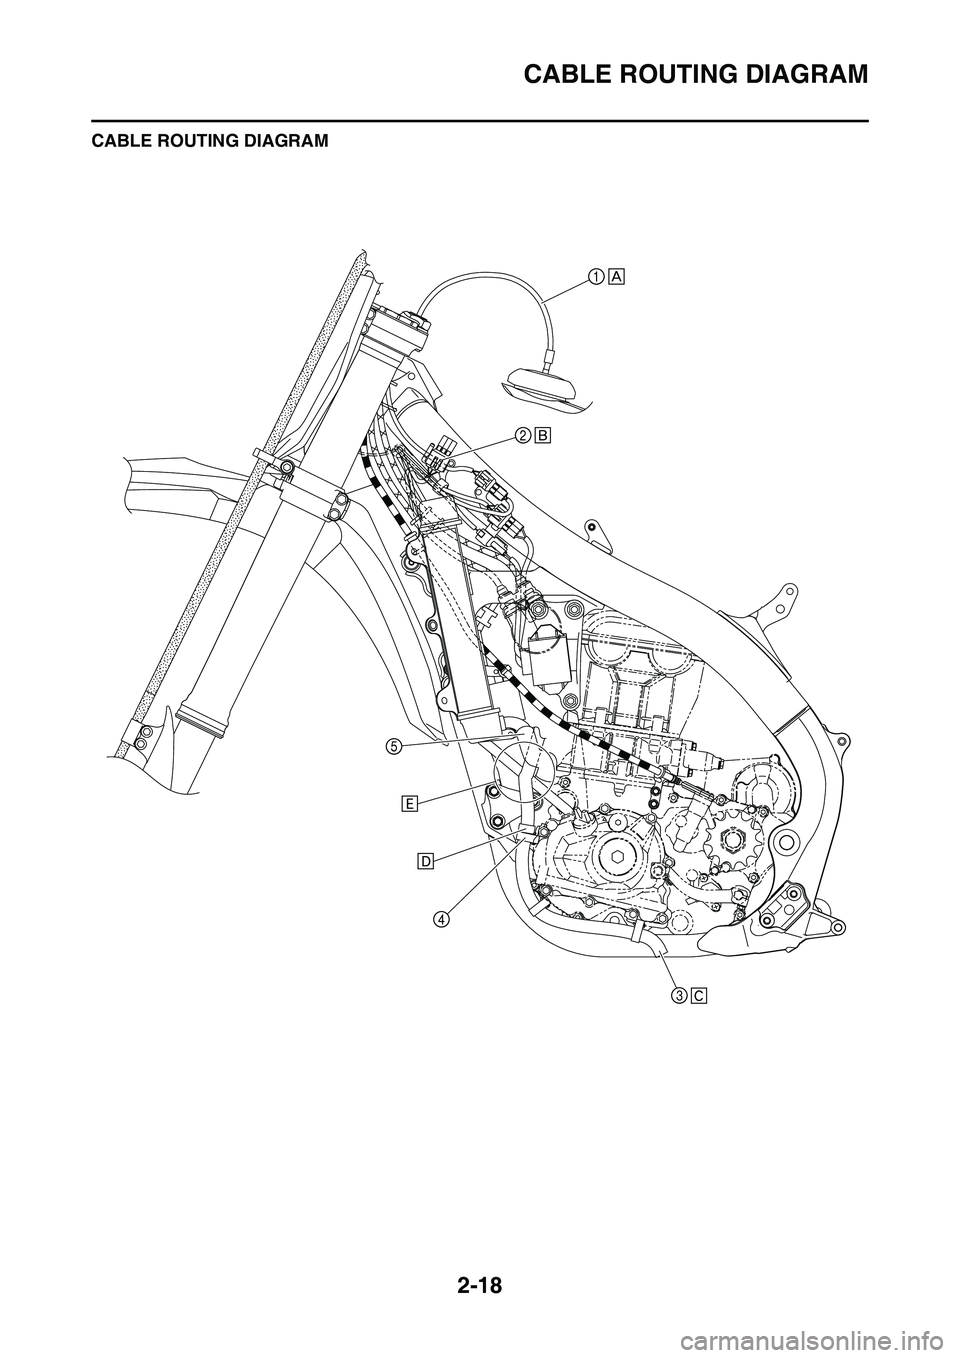 YAMAHA YZ450F 2010 Service Manual 2-18
CABLE ROUTING DIAGRAM
CABLE ROUTING DIAGRAM 